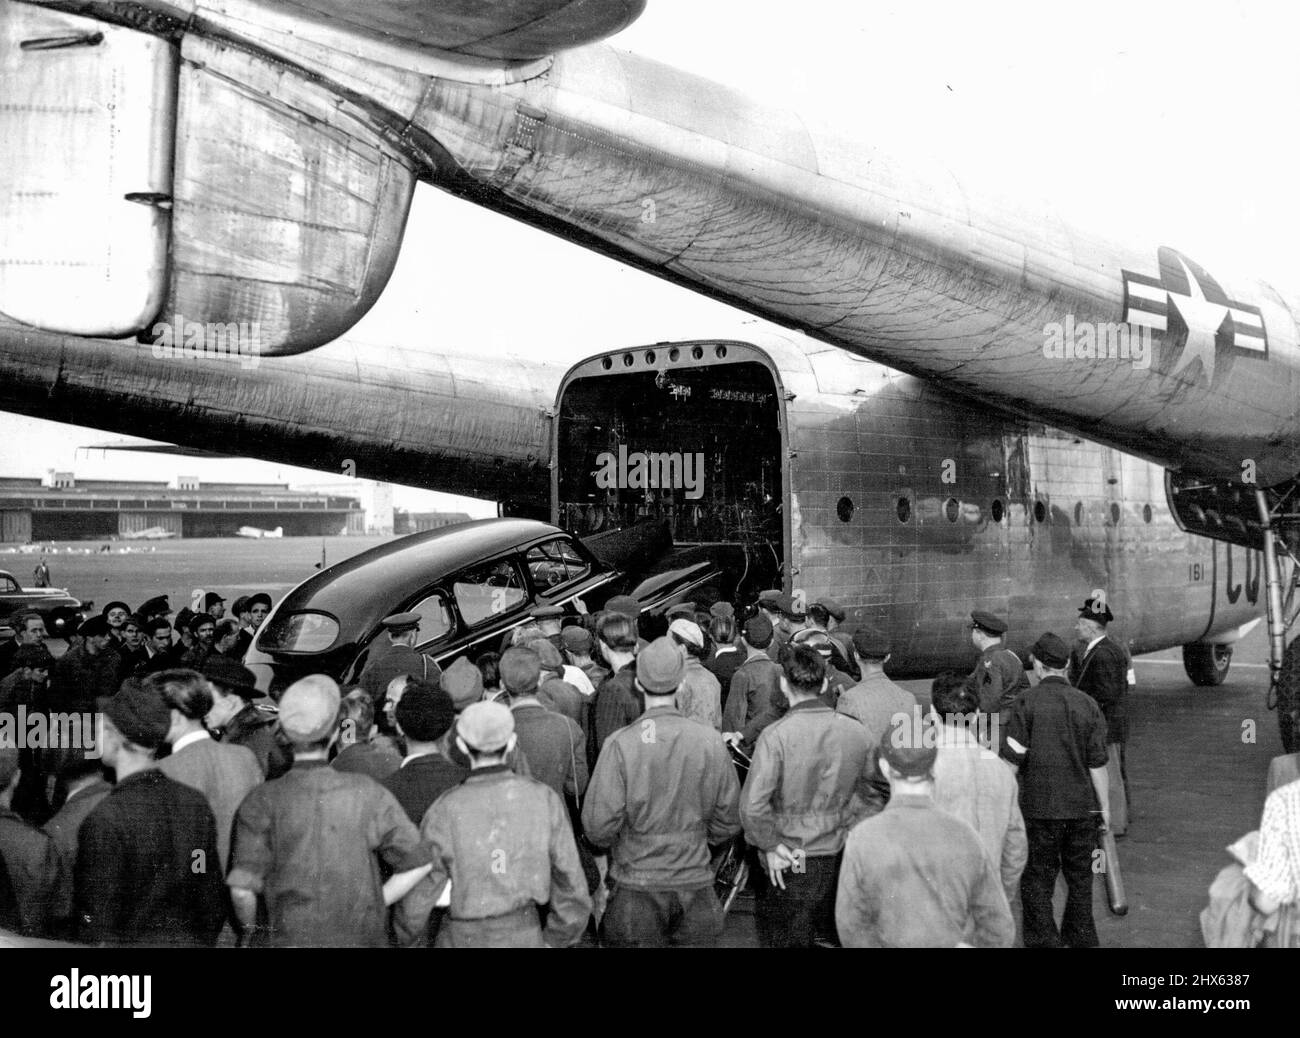 'Flying Boxcar' Takes Cars From Berlin. An American car from Blookaded Berlin is loaded into a United States Air Force 'Flying Boxcar' (C-81) at Tempelhof Airport, September 14. The aircraft is the first of its kind to be introduced on the Berlin 'Air-Life' and the car is the first of many American-owned vehicles that are to be flown out of the German capital. September 16, 1948. (Photo by Associated Press Photo). Stock Photo